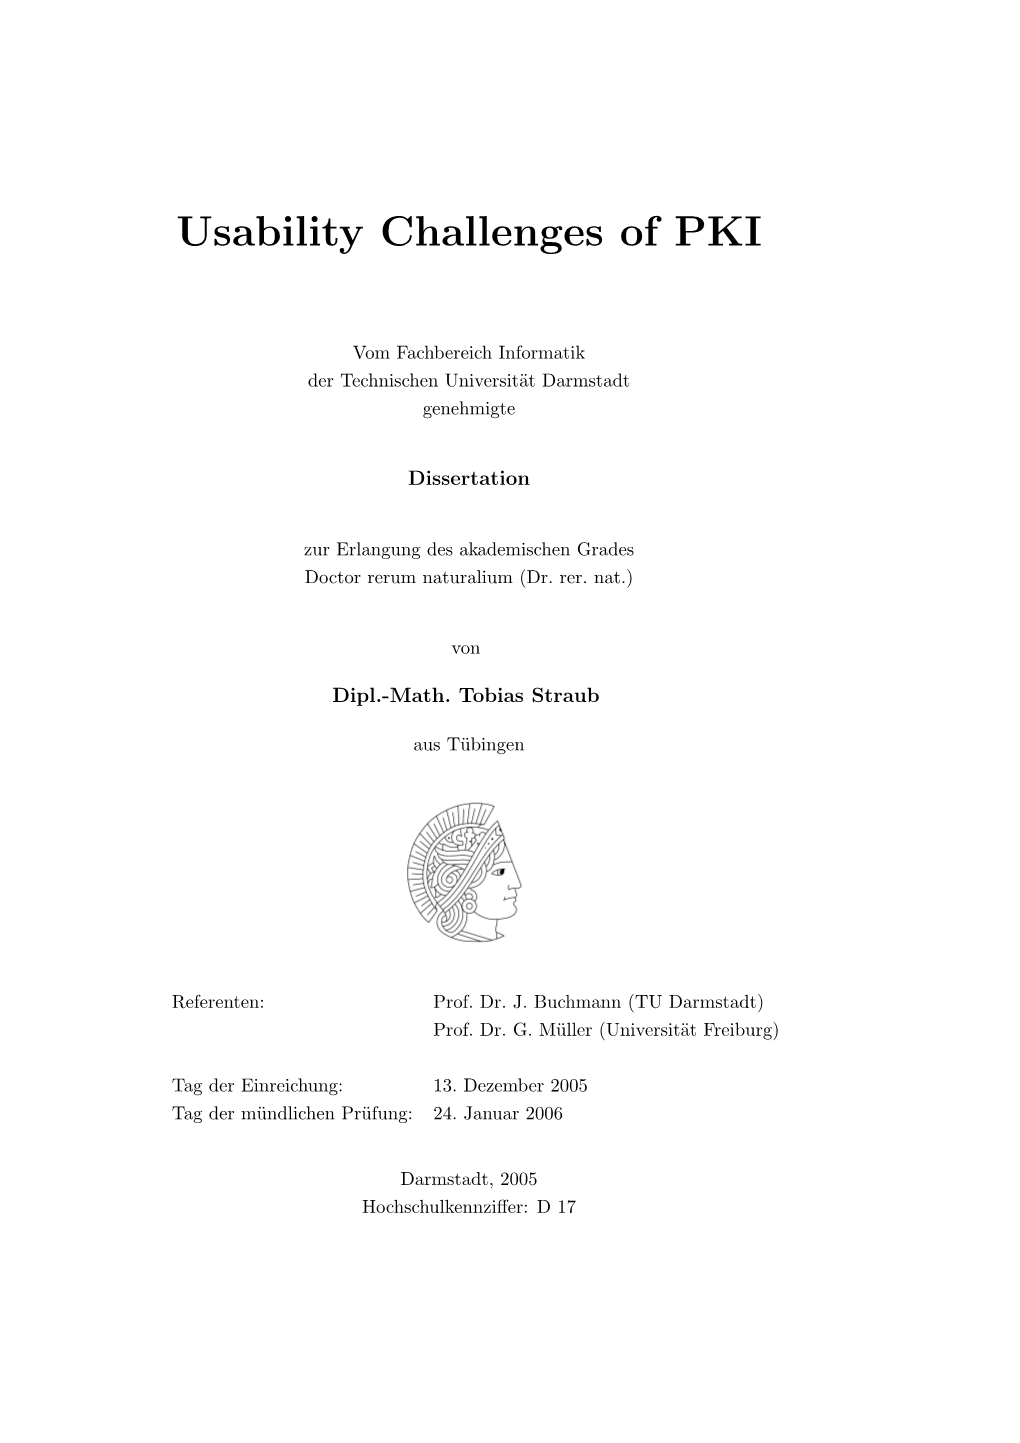 Usability Challenges of PKI